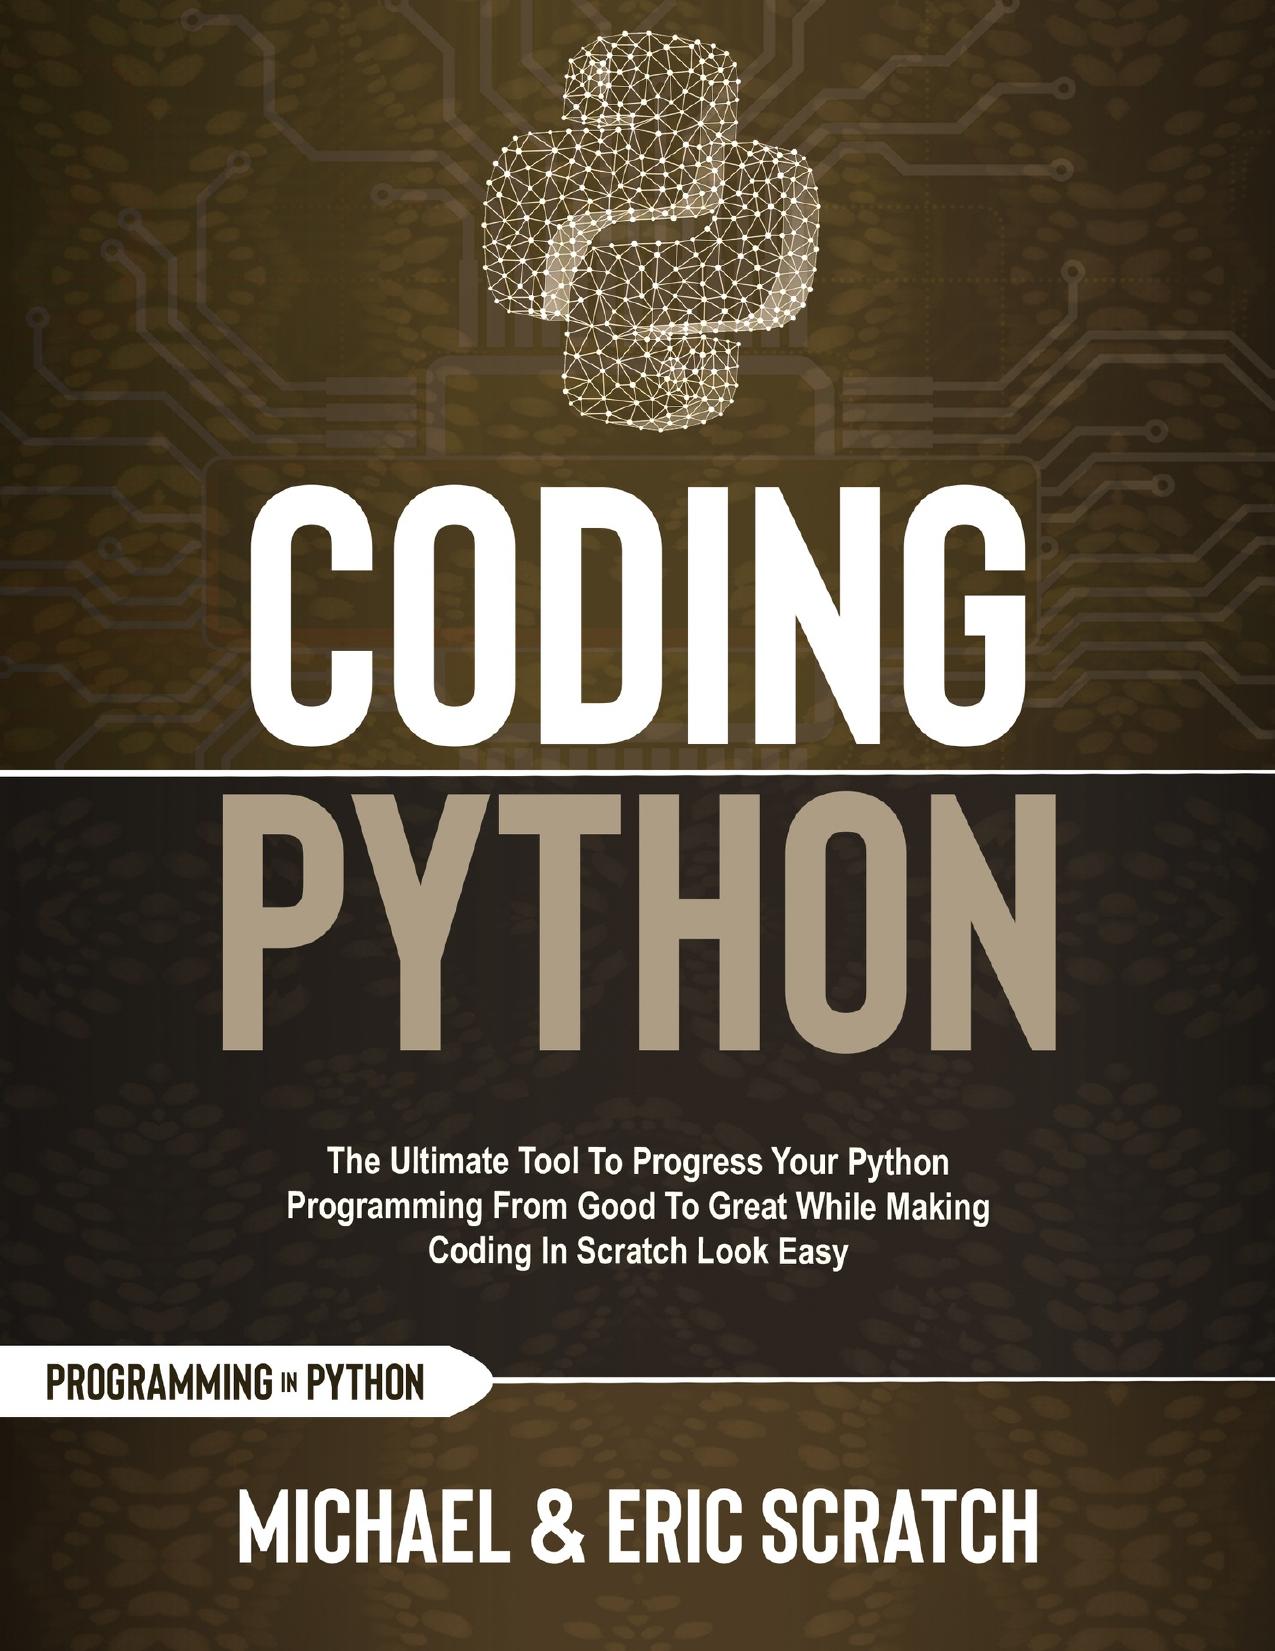 Coding Python : The Ultimate Tool To Progress Your Python Programming From Good To Great While Making Coding In Scratch Look Easy (Python programming language) by Scratch Michael & Erik